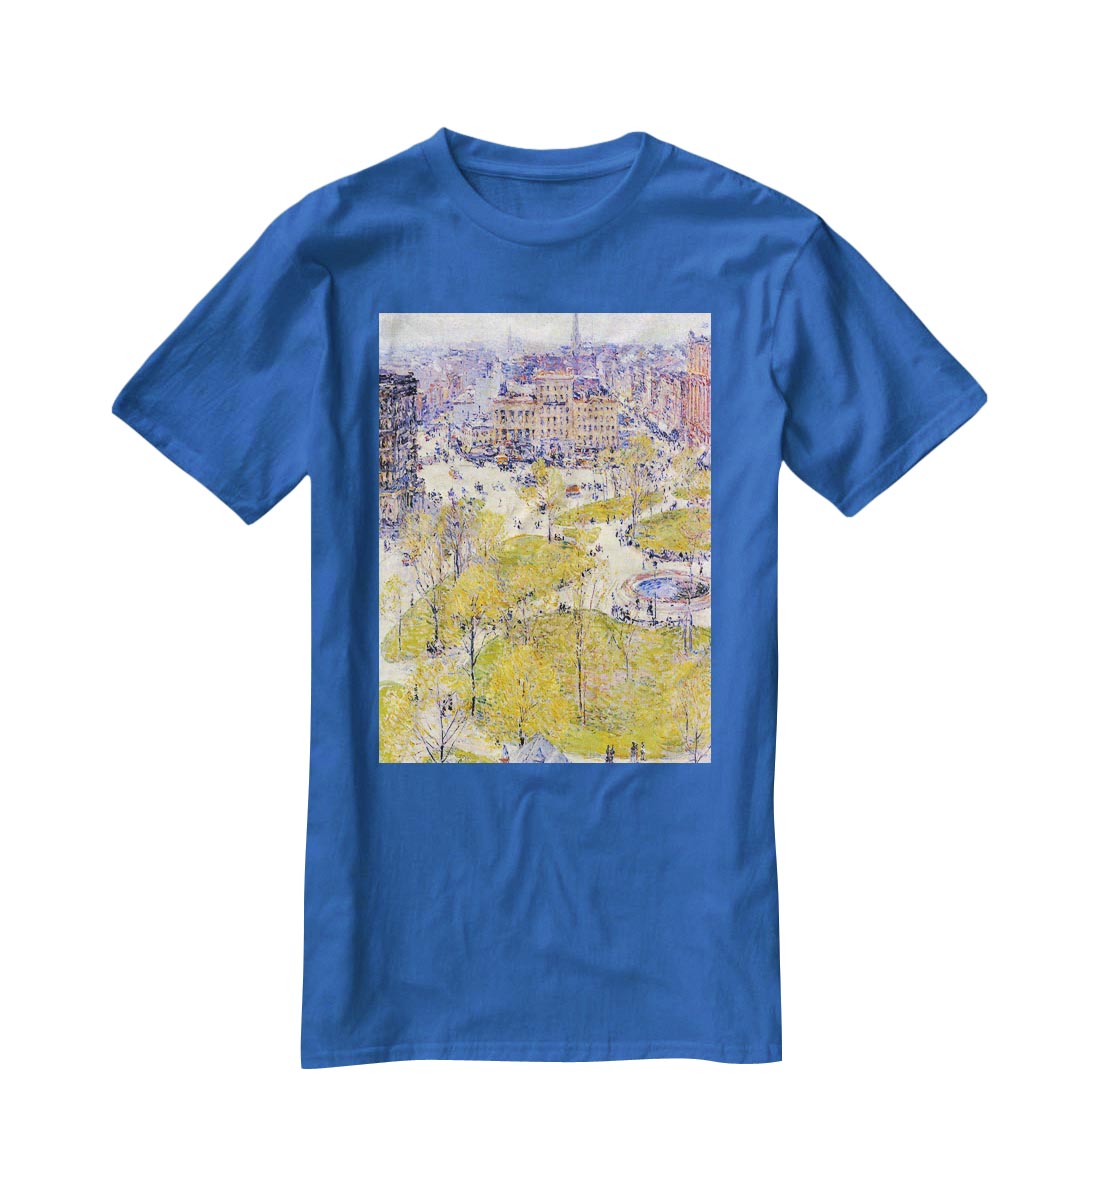 Union Square in Spring by Hassam T-Shirt - Canvas Art Rocks - 2